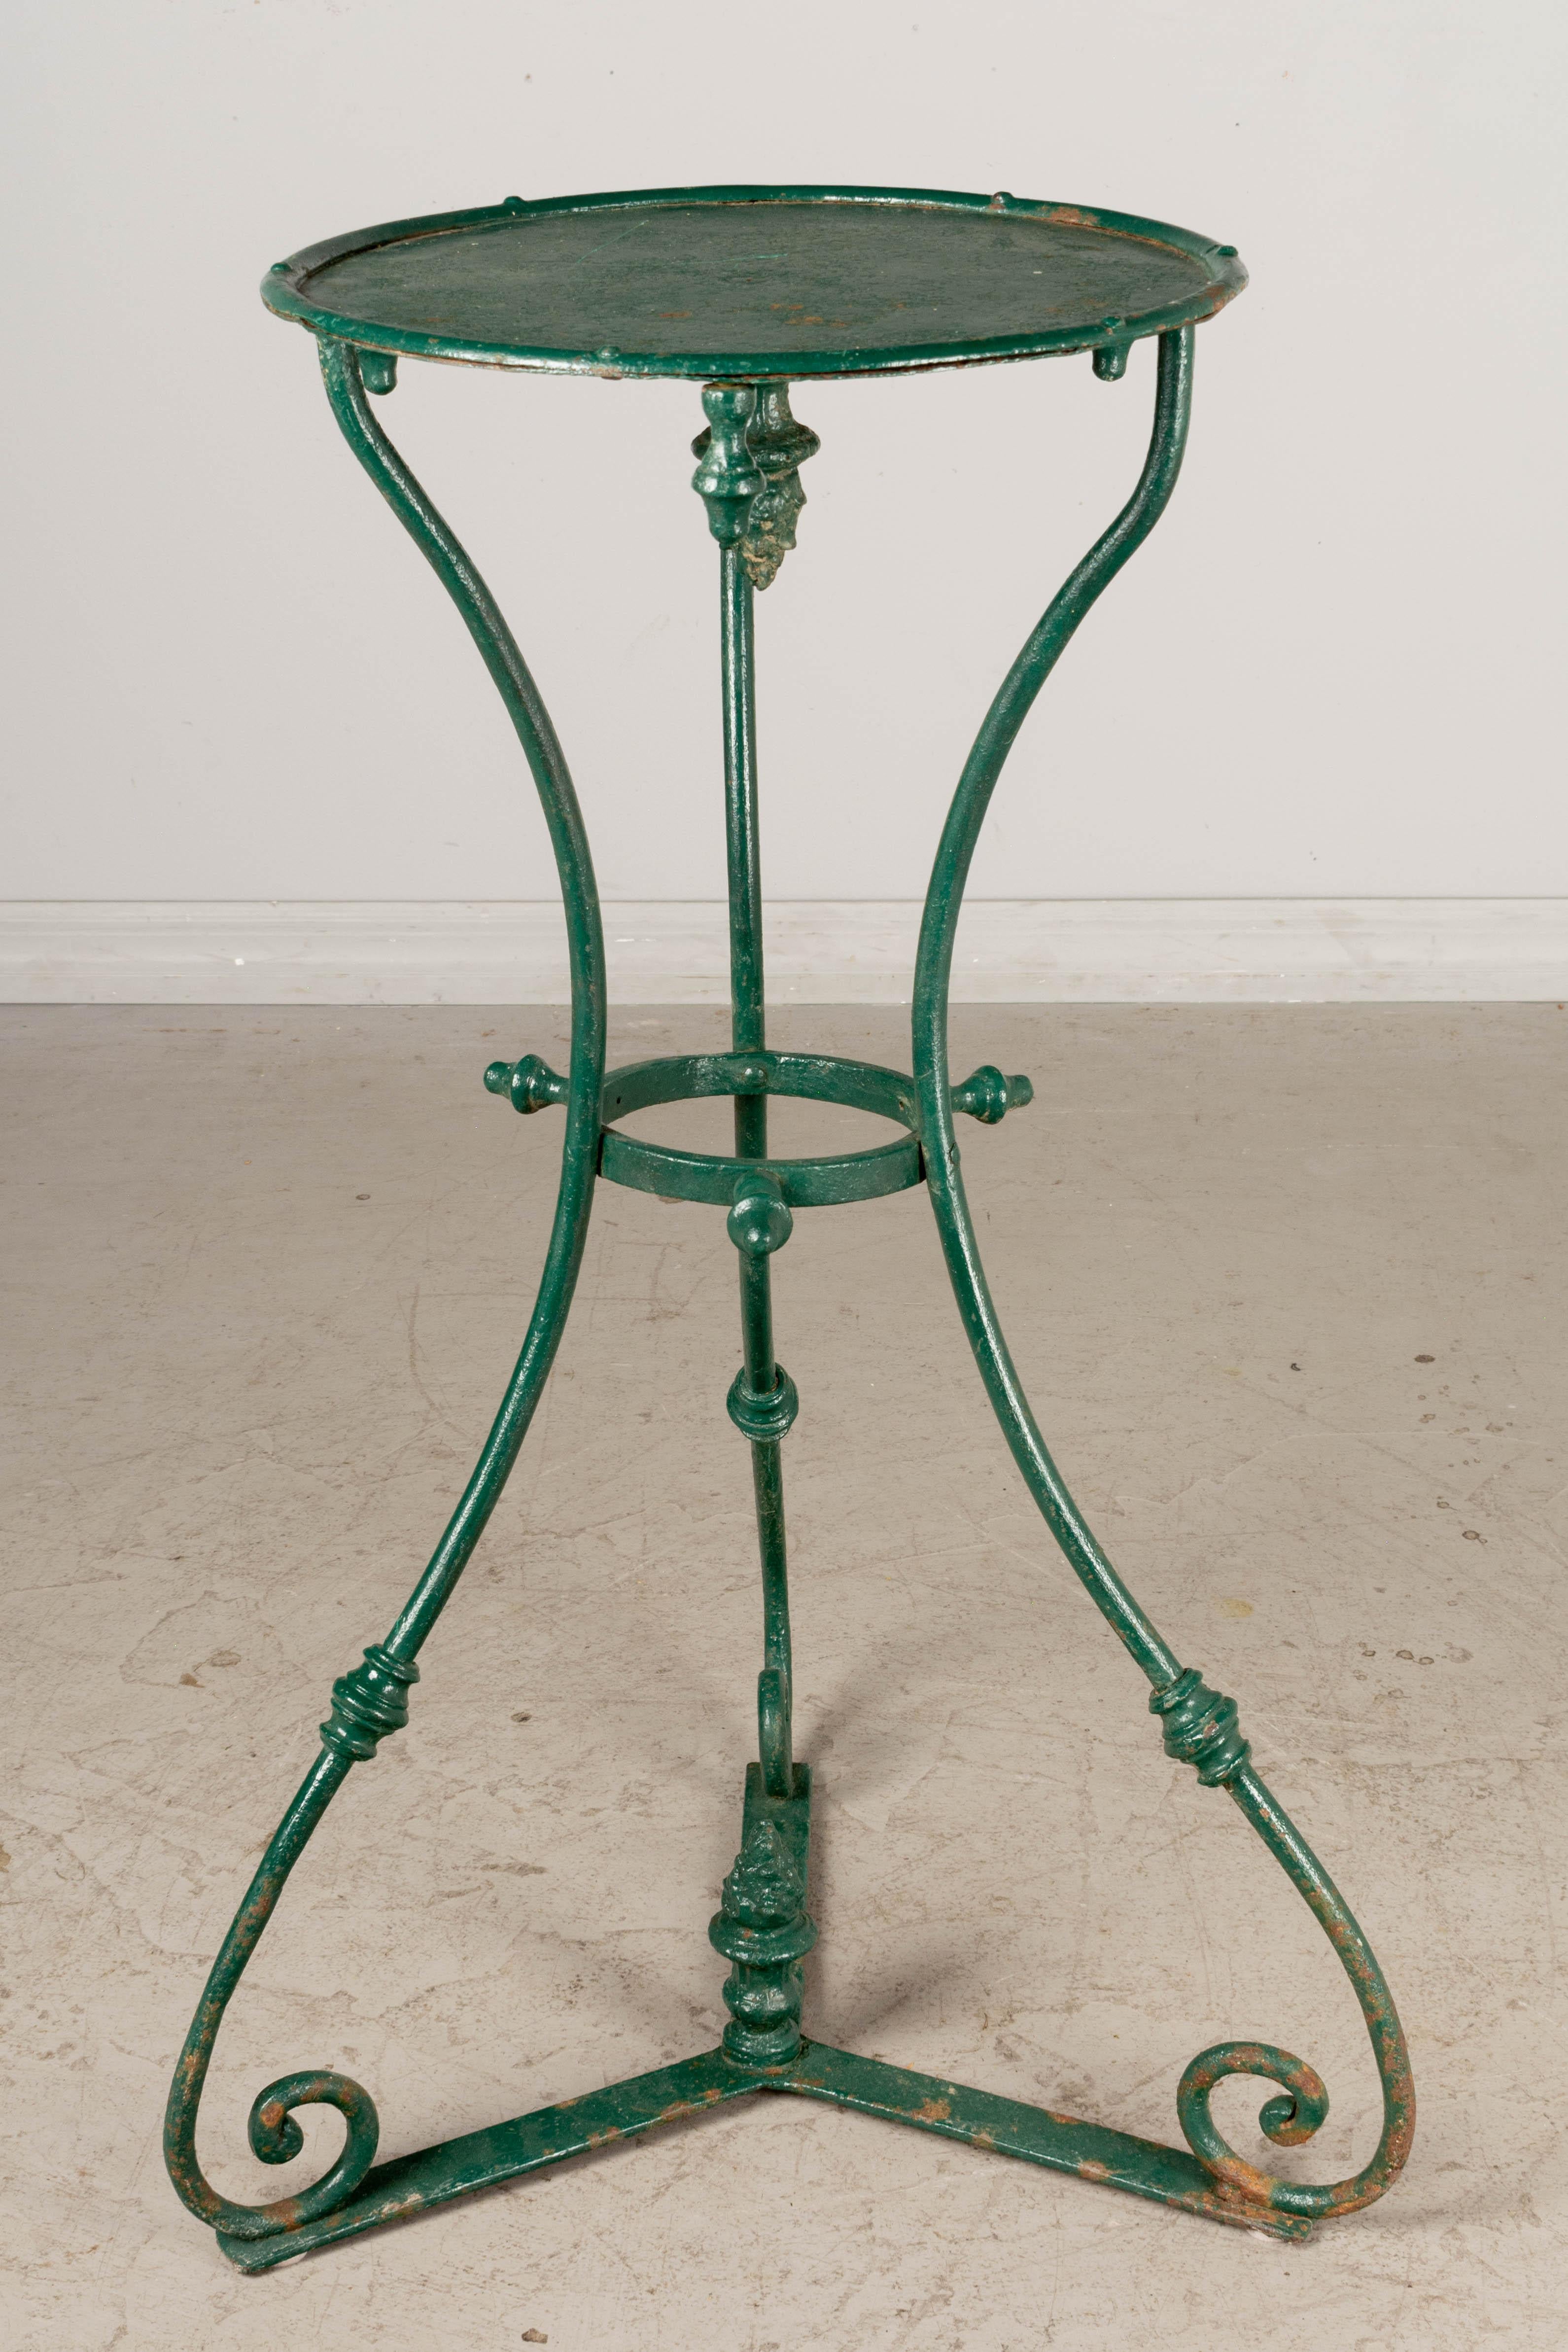 A 19th century French green painted wrought iron gueridon garden pedestal or plant stand. Tripod base with tôle top and decorative cast iron finials. 
35